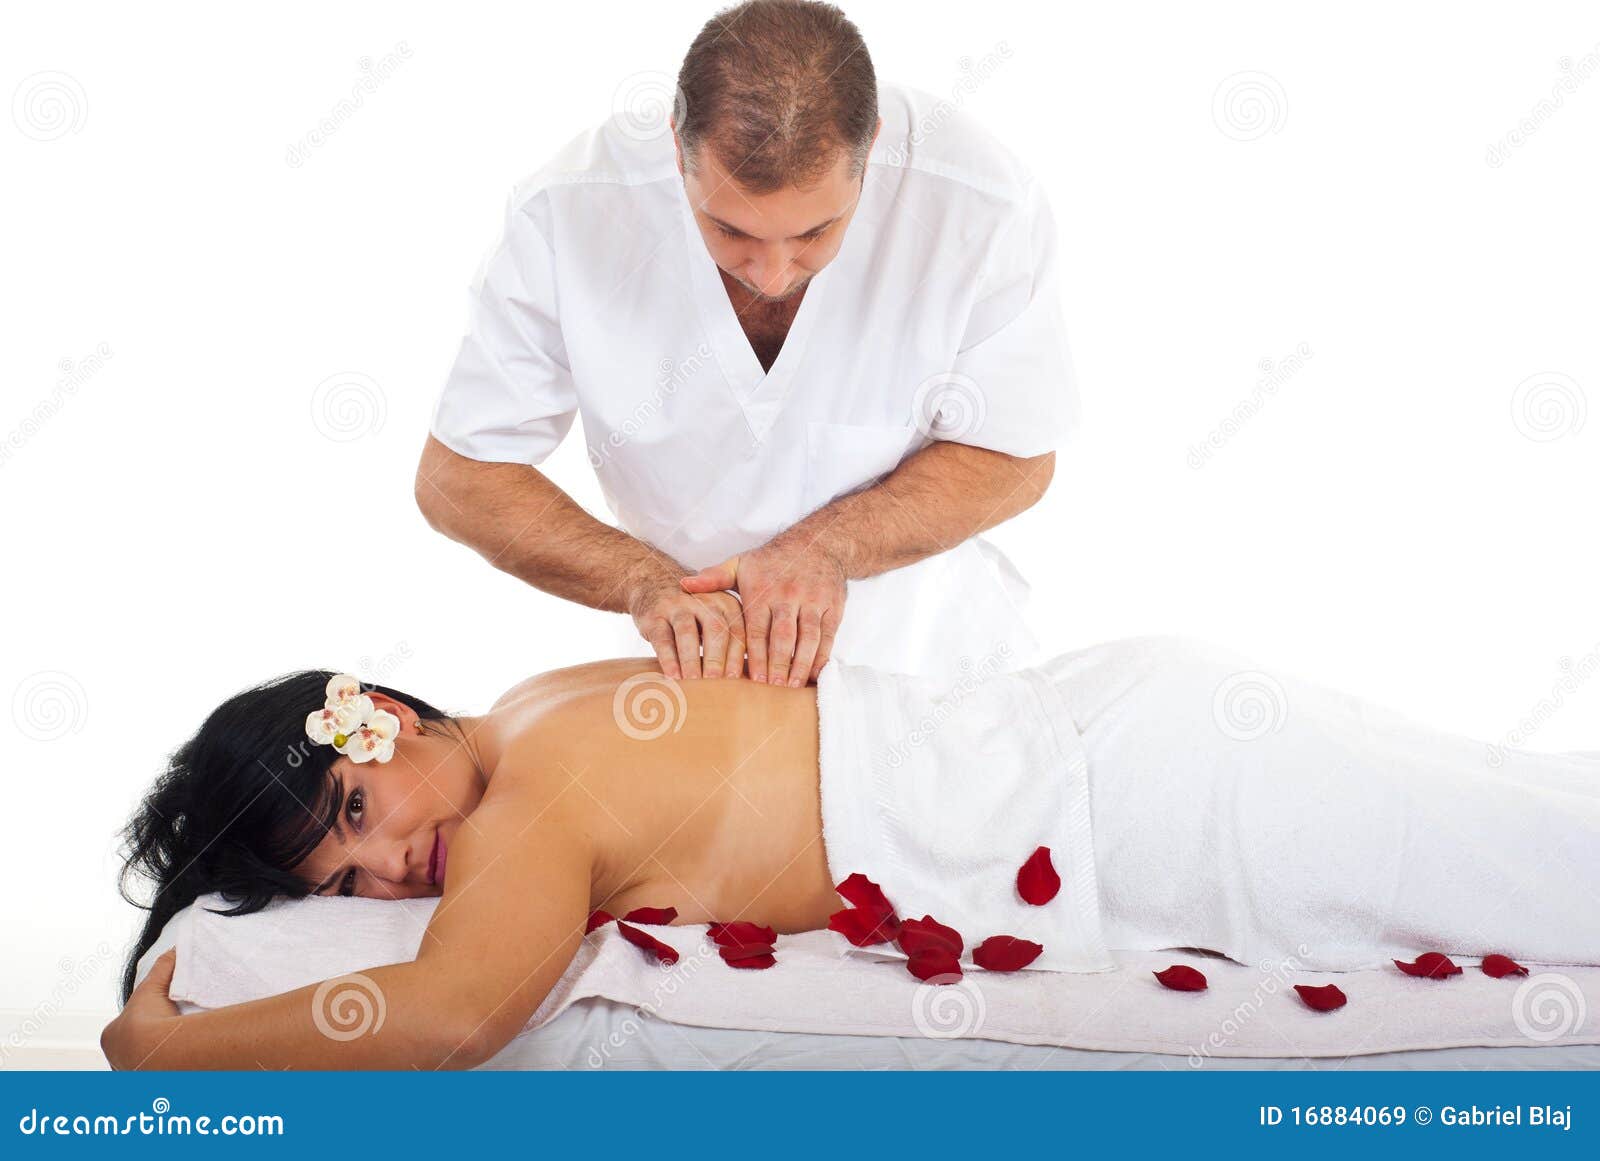 Professionally woman who gives massages How To